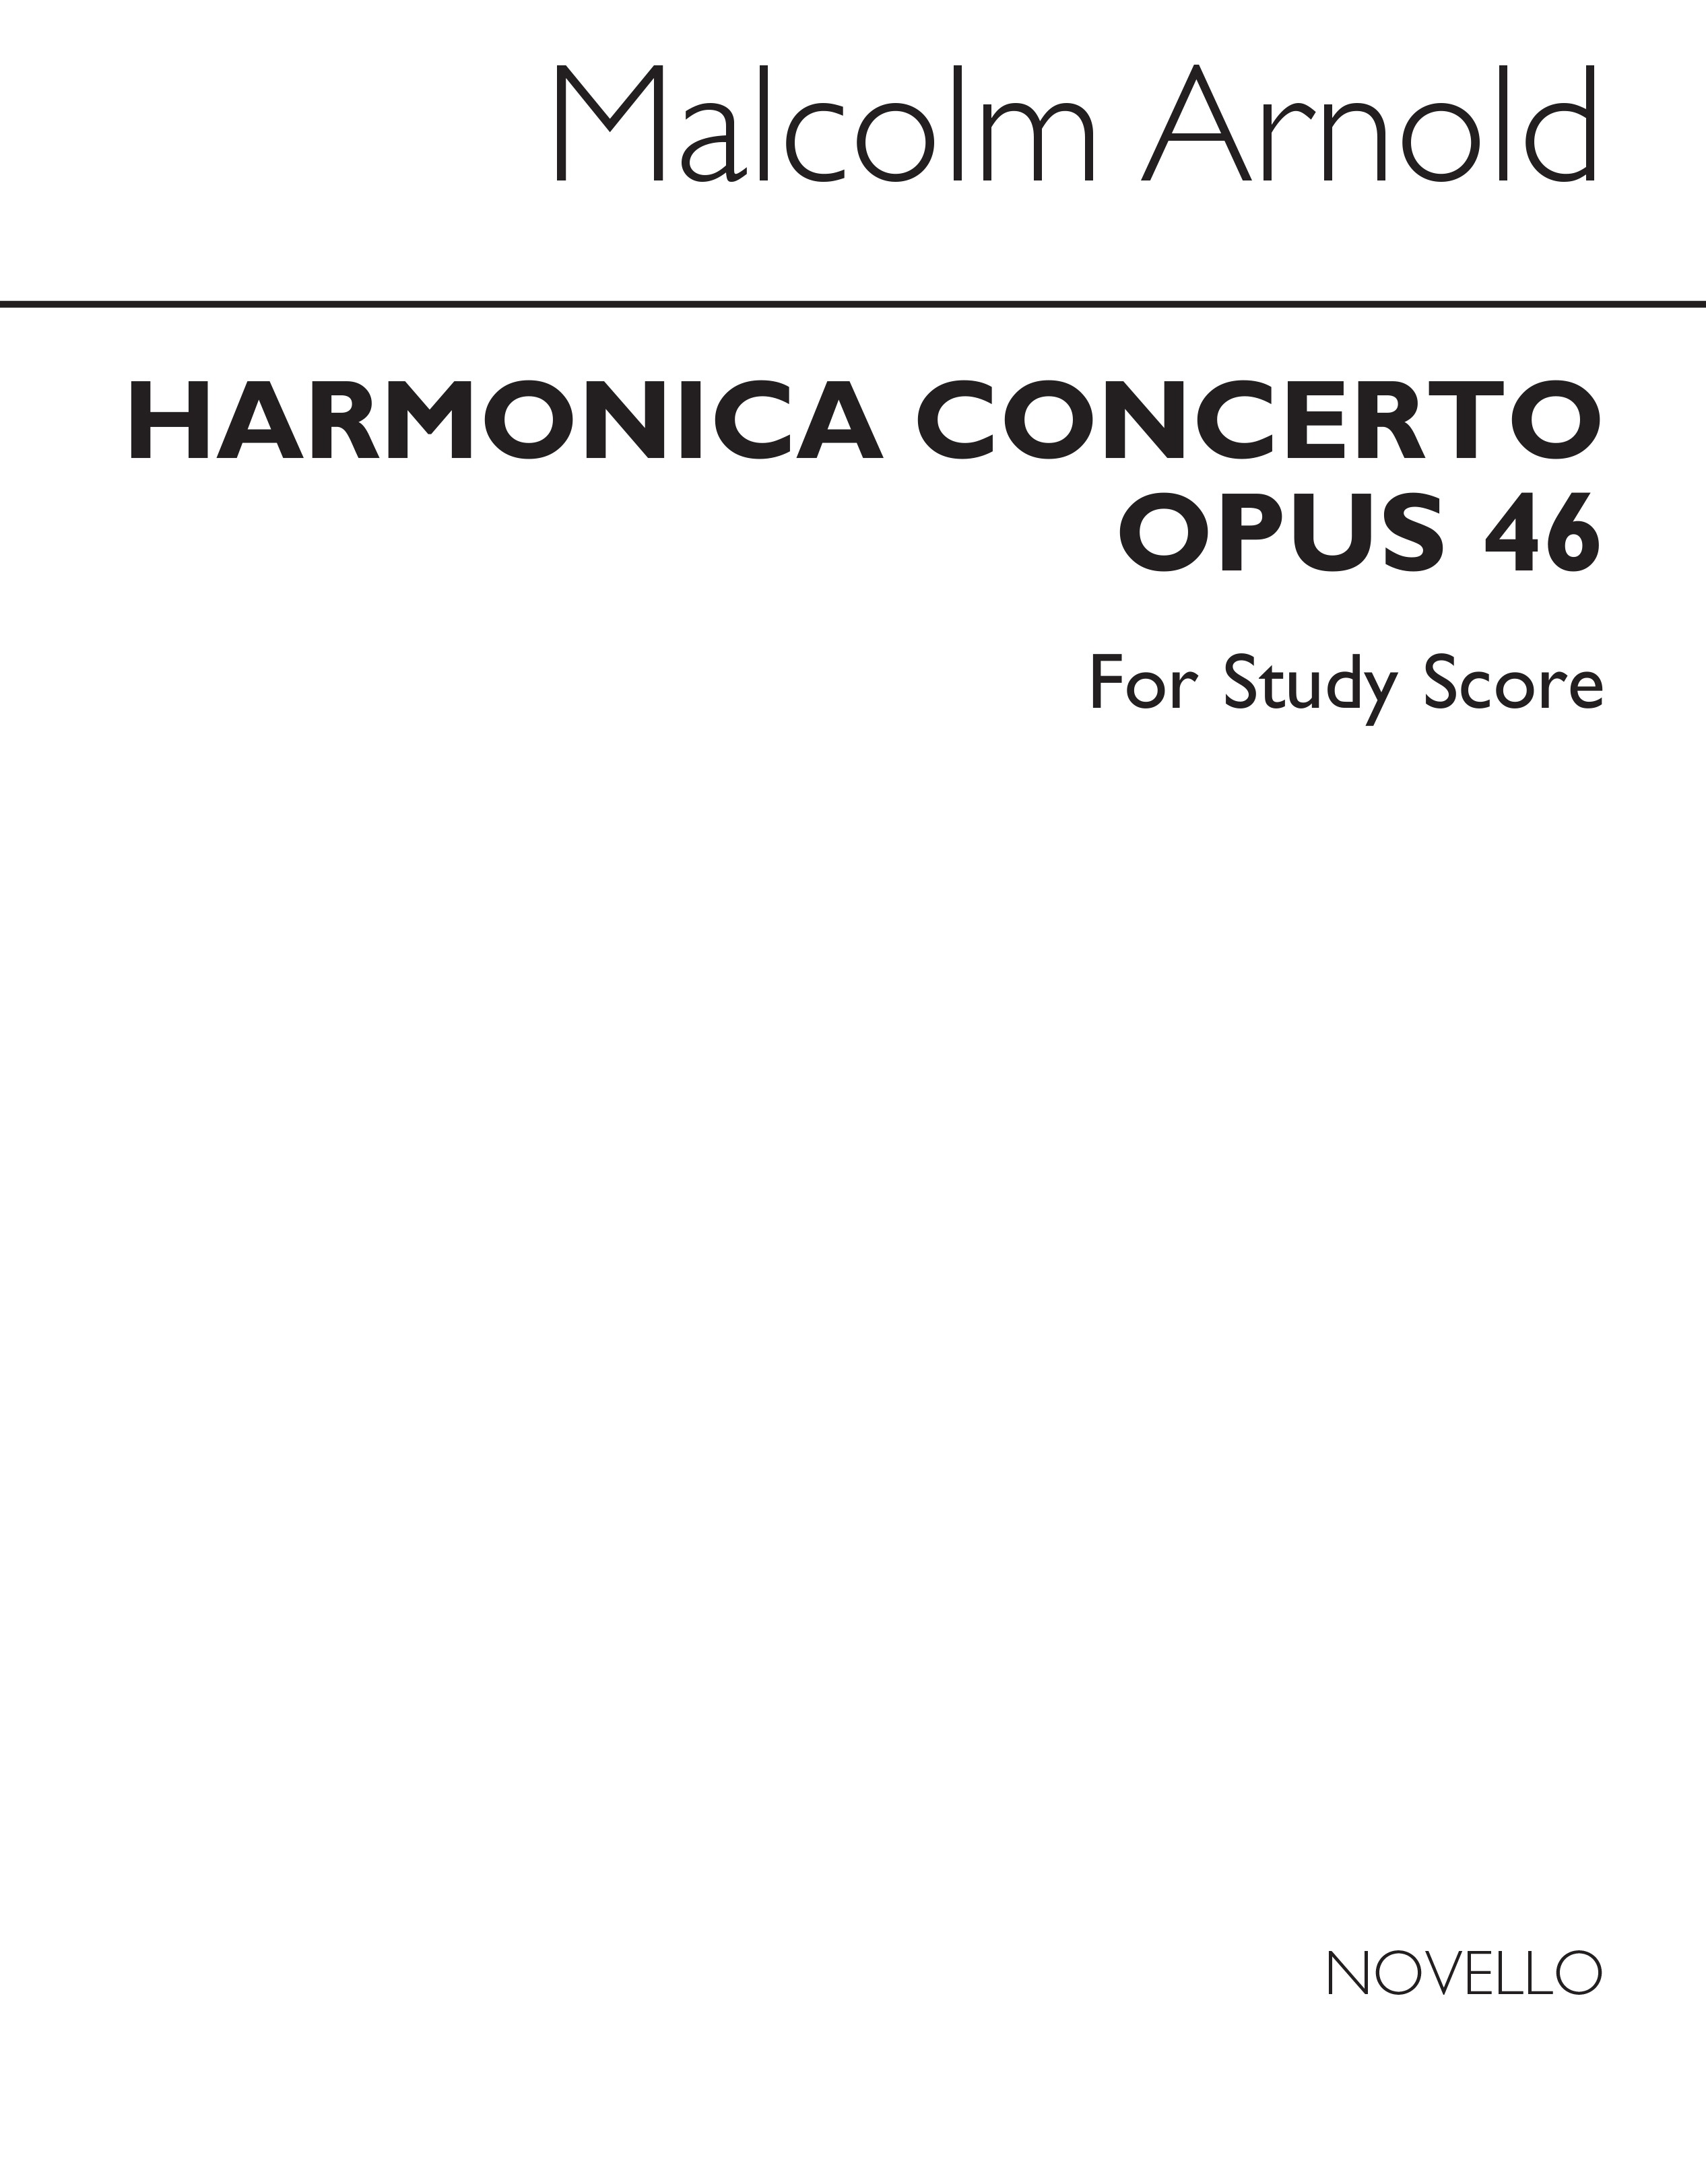 Malcolm Arnold: Concerto For Harmonica and Orchestra Op.46: Harmonica: Study